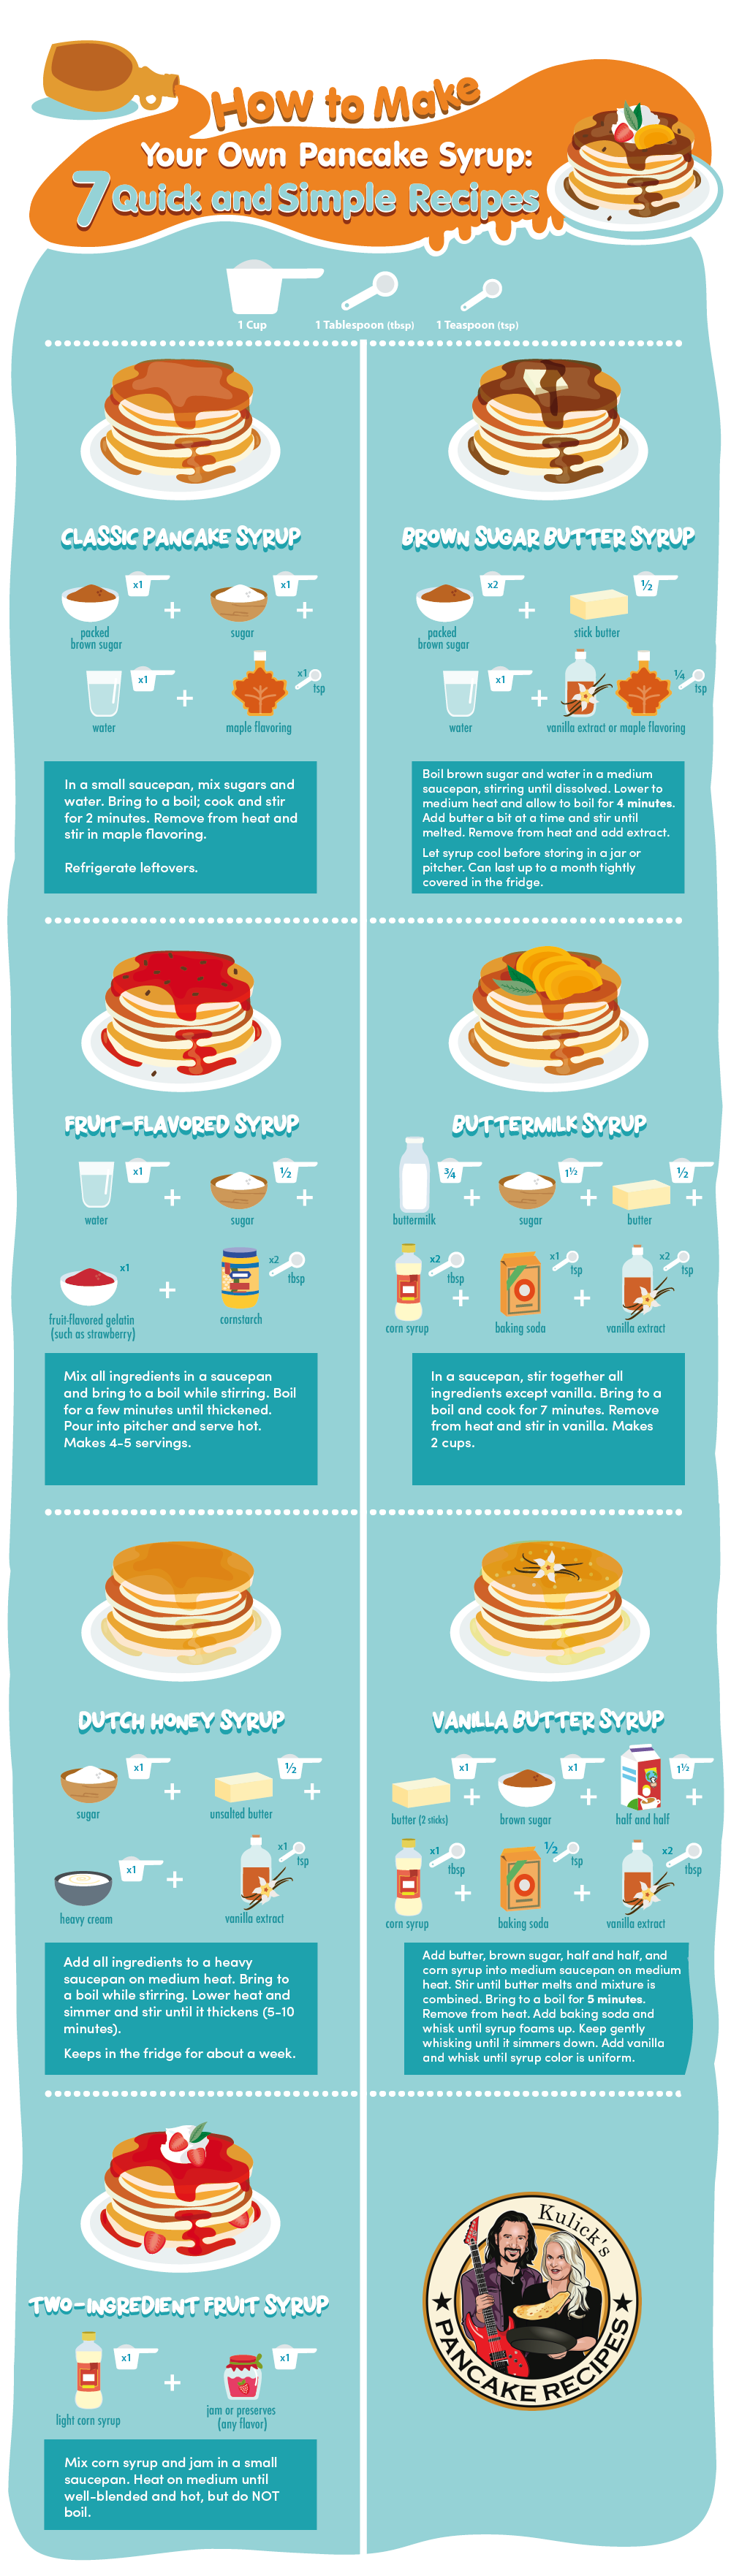 How to Make Your Own Pancake Syrup